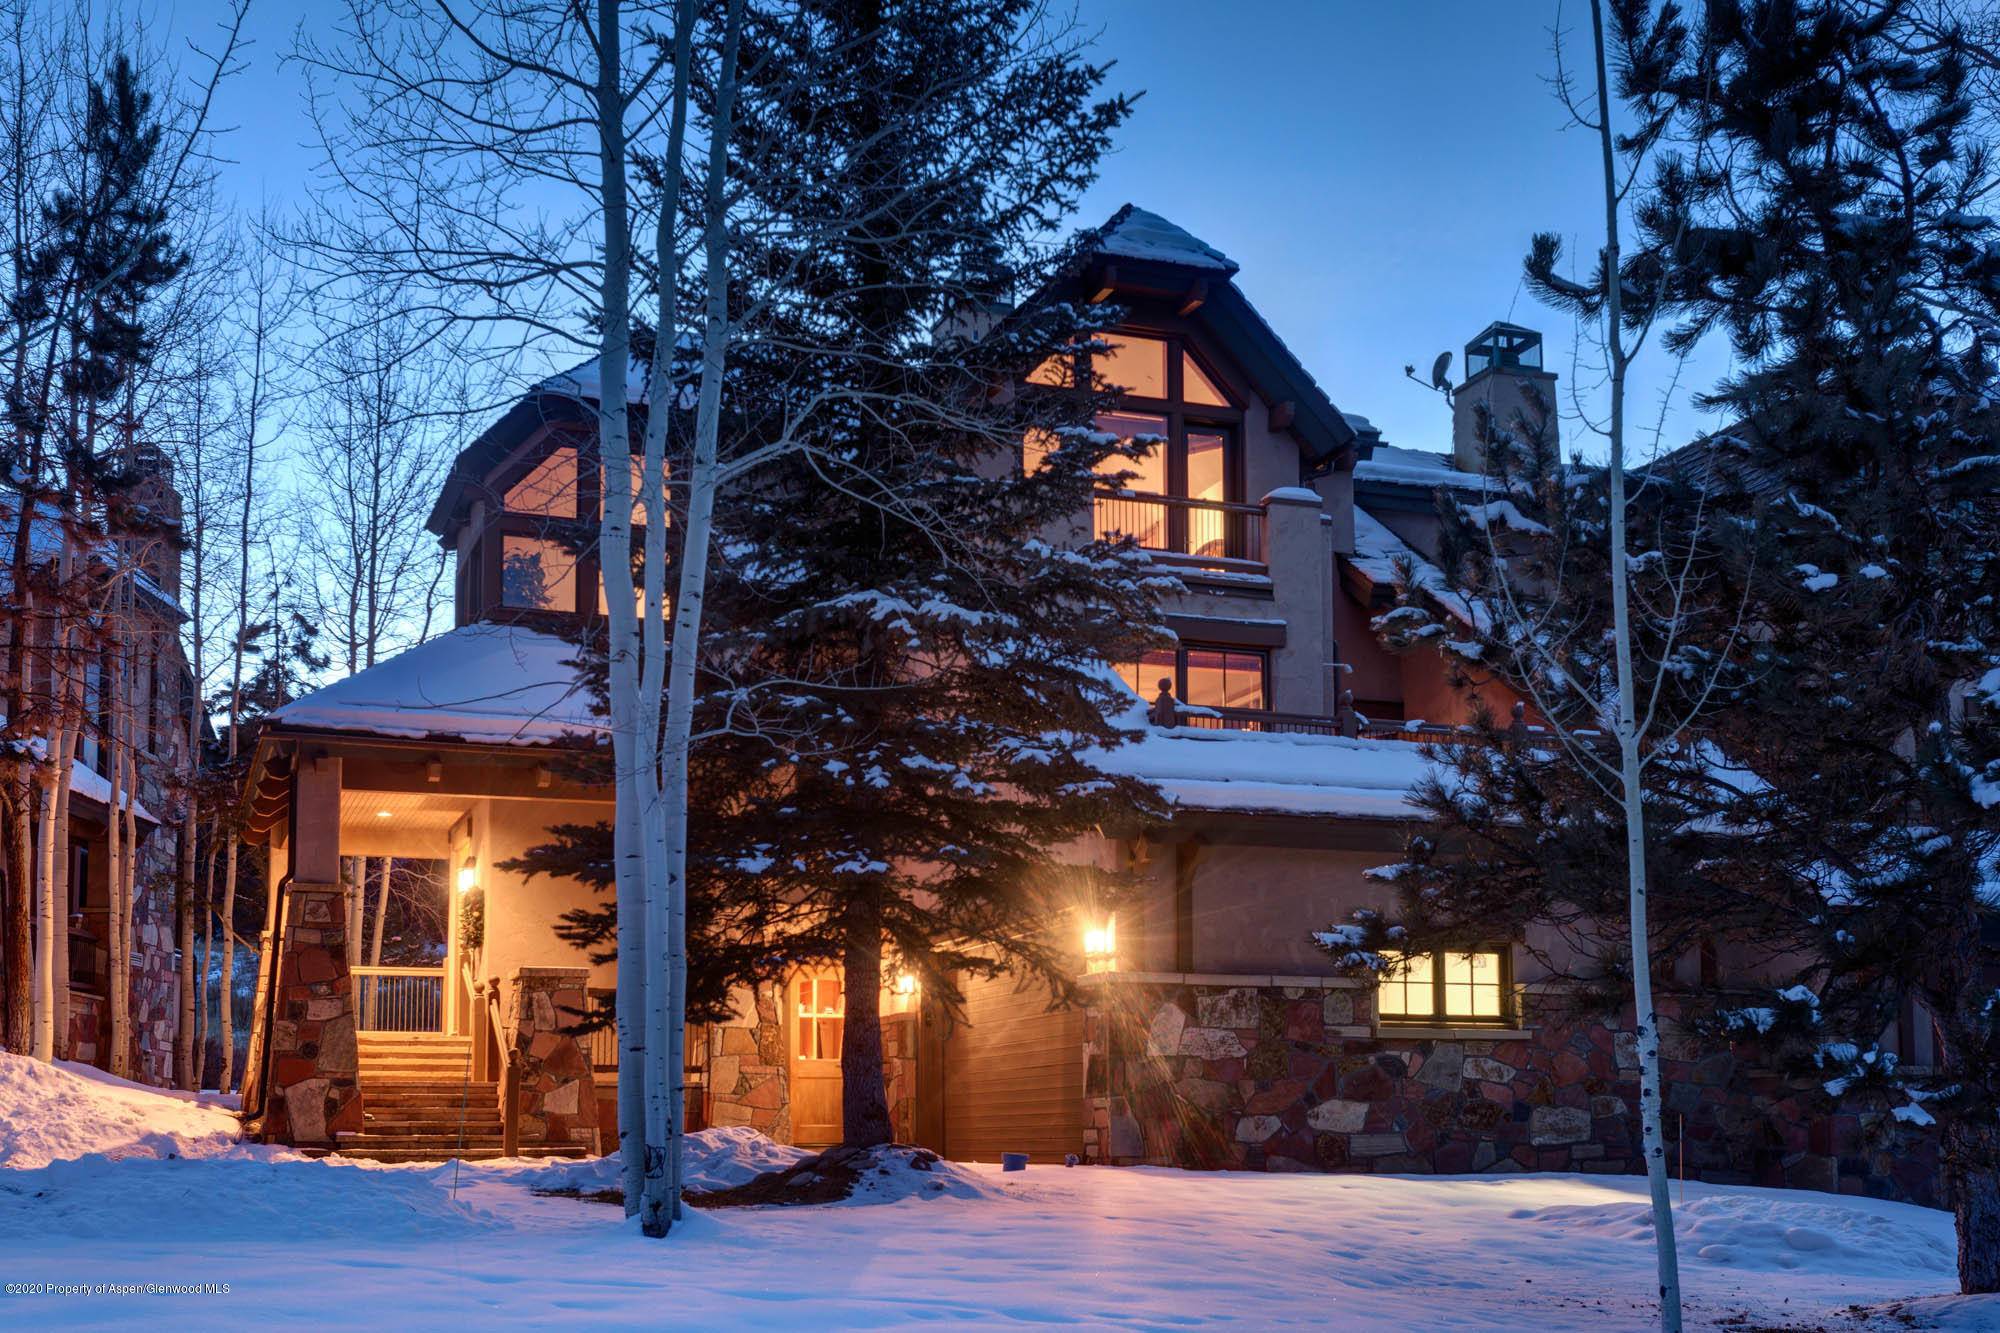 Year after year, the Owl Creek Townhomes remain one of the most desirable neighborhoods in Snowmass offering the ability to ski, hike bike out your door, great outdoor space beautiful ...